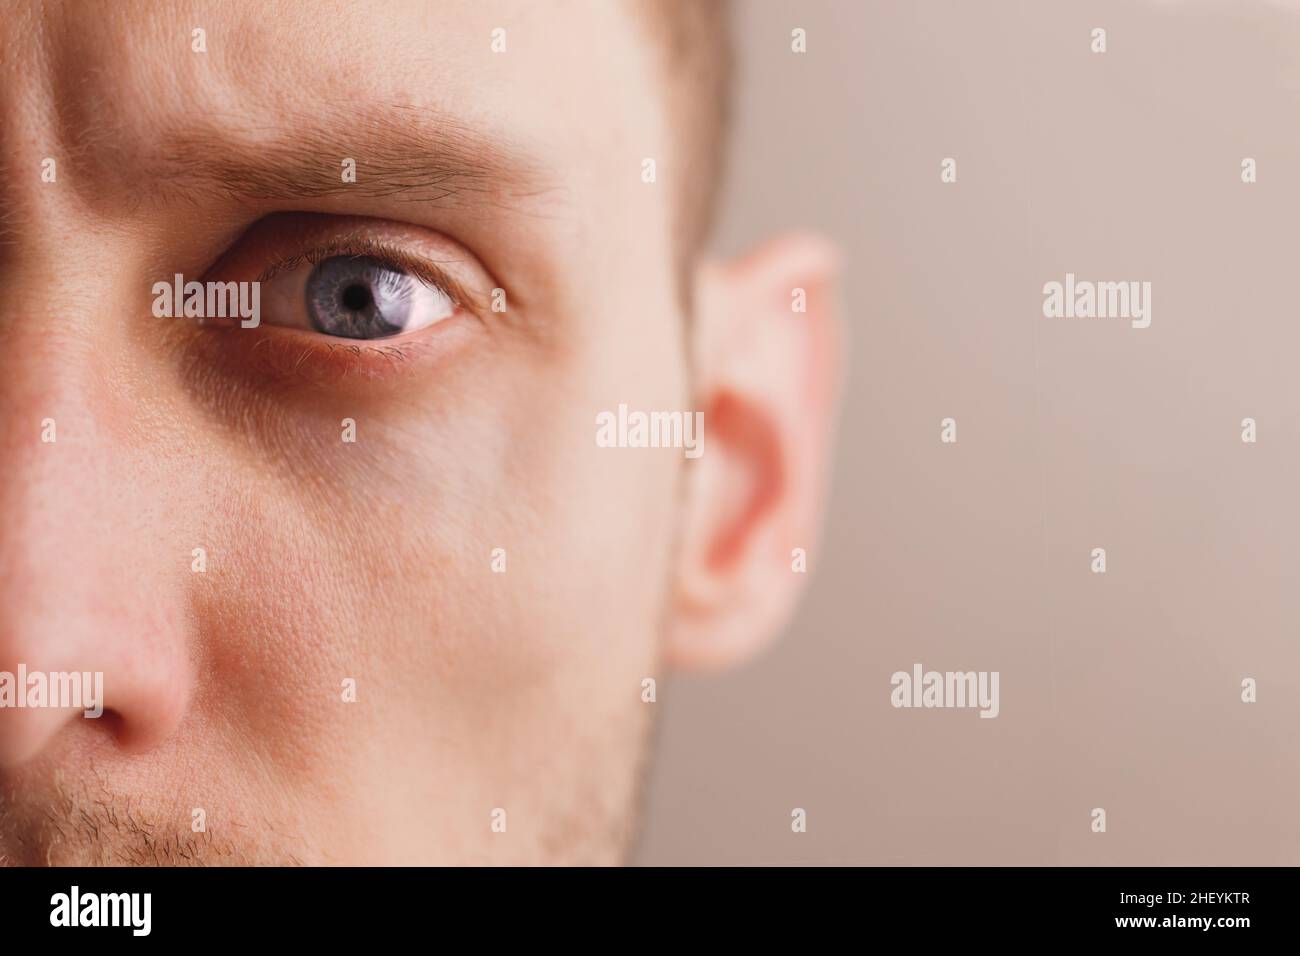 Young worried man with stern look. Sad expression. Close-up portrait half face. Mental health Stock Photo